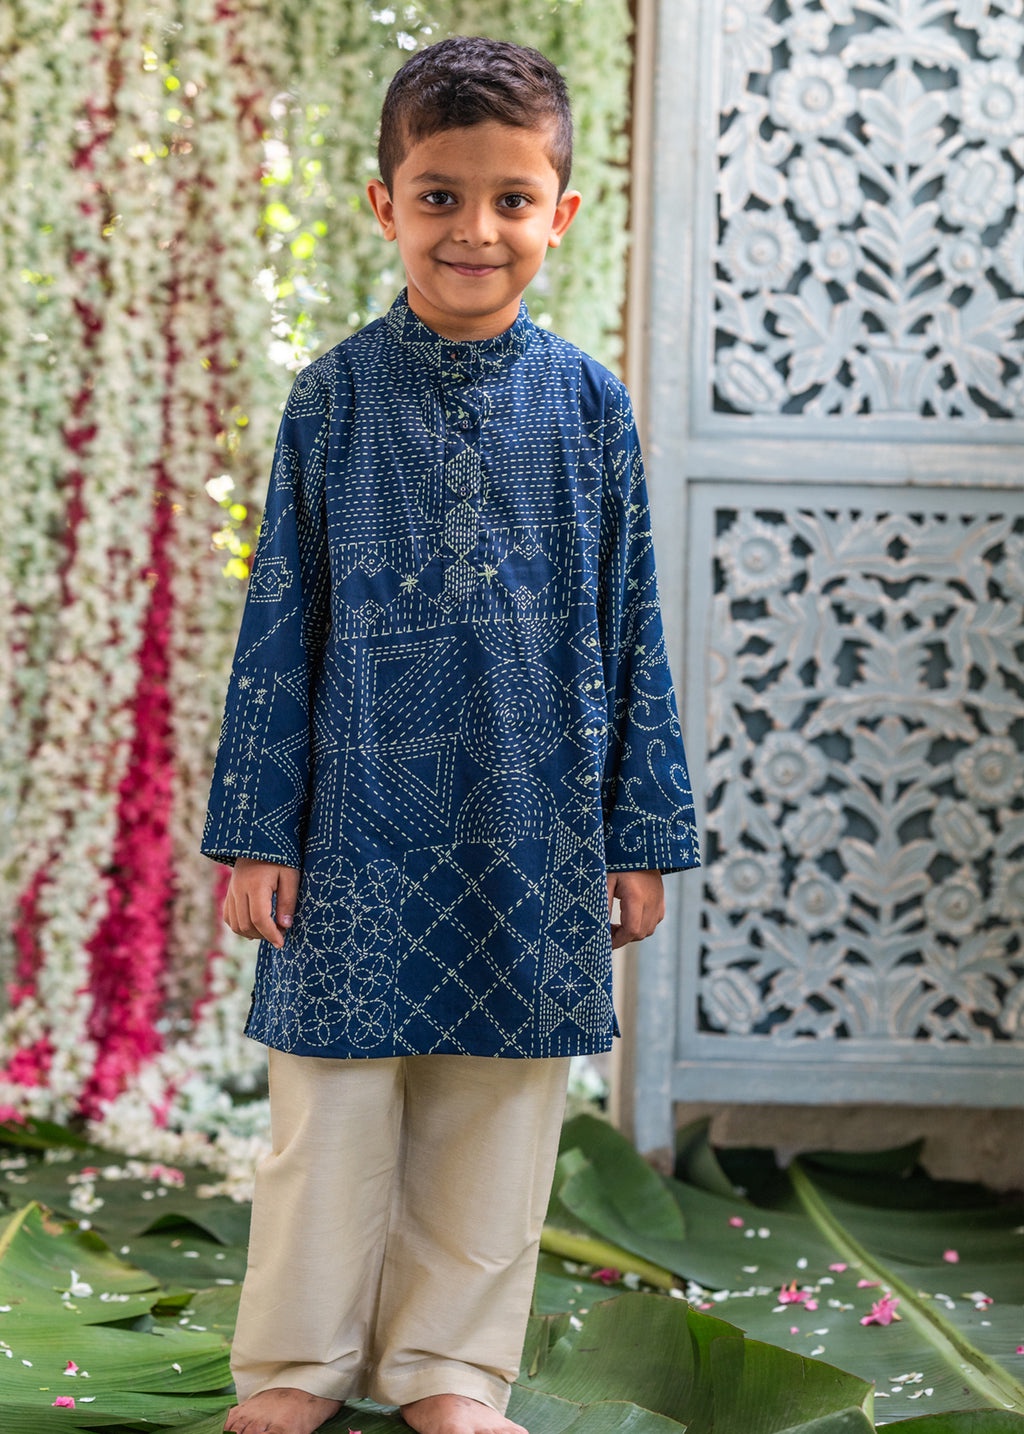 Elevating Boys' Style with Cotton Dresses and Embroidered Kurtas